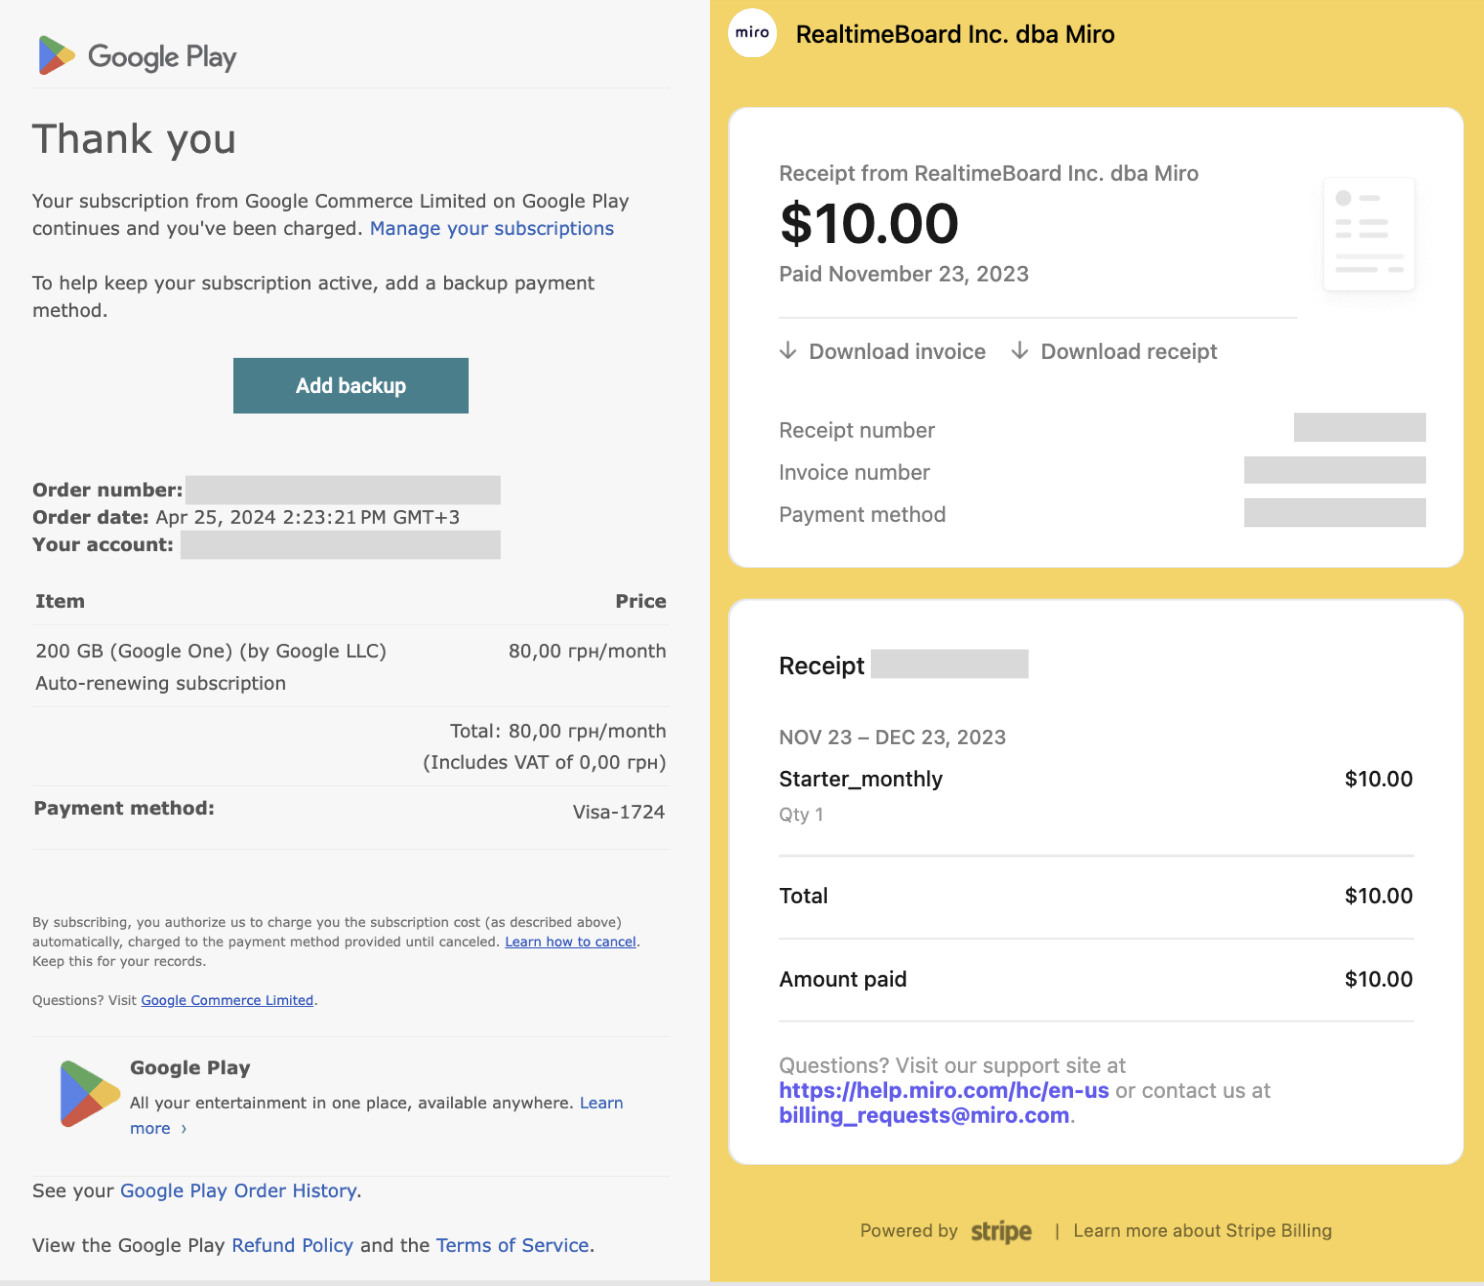 receipt-and-invoice-email-examples